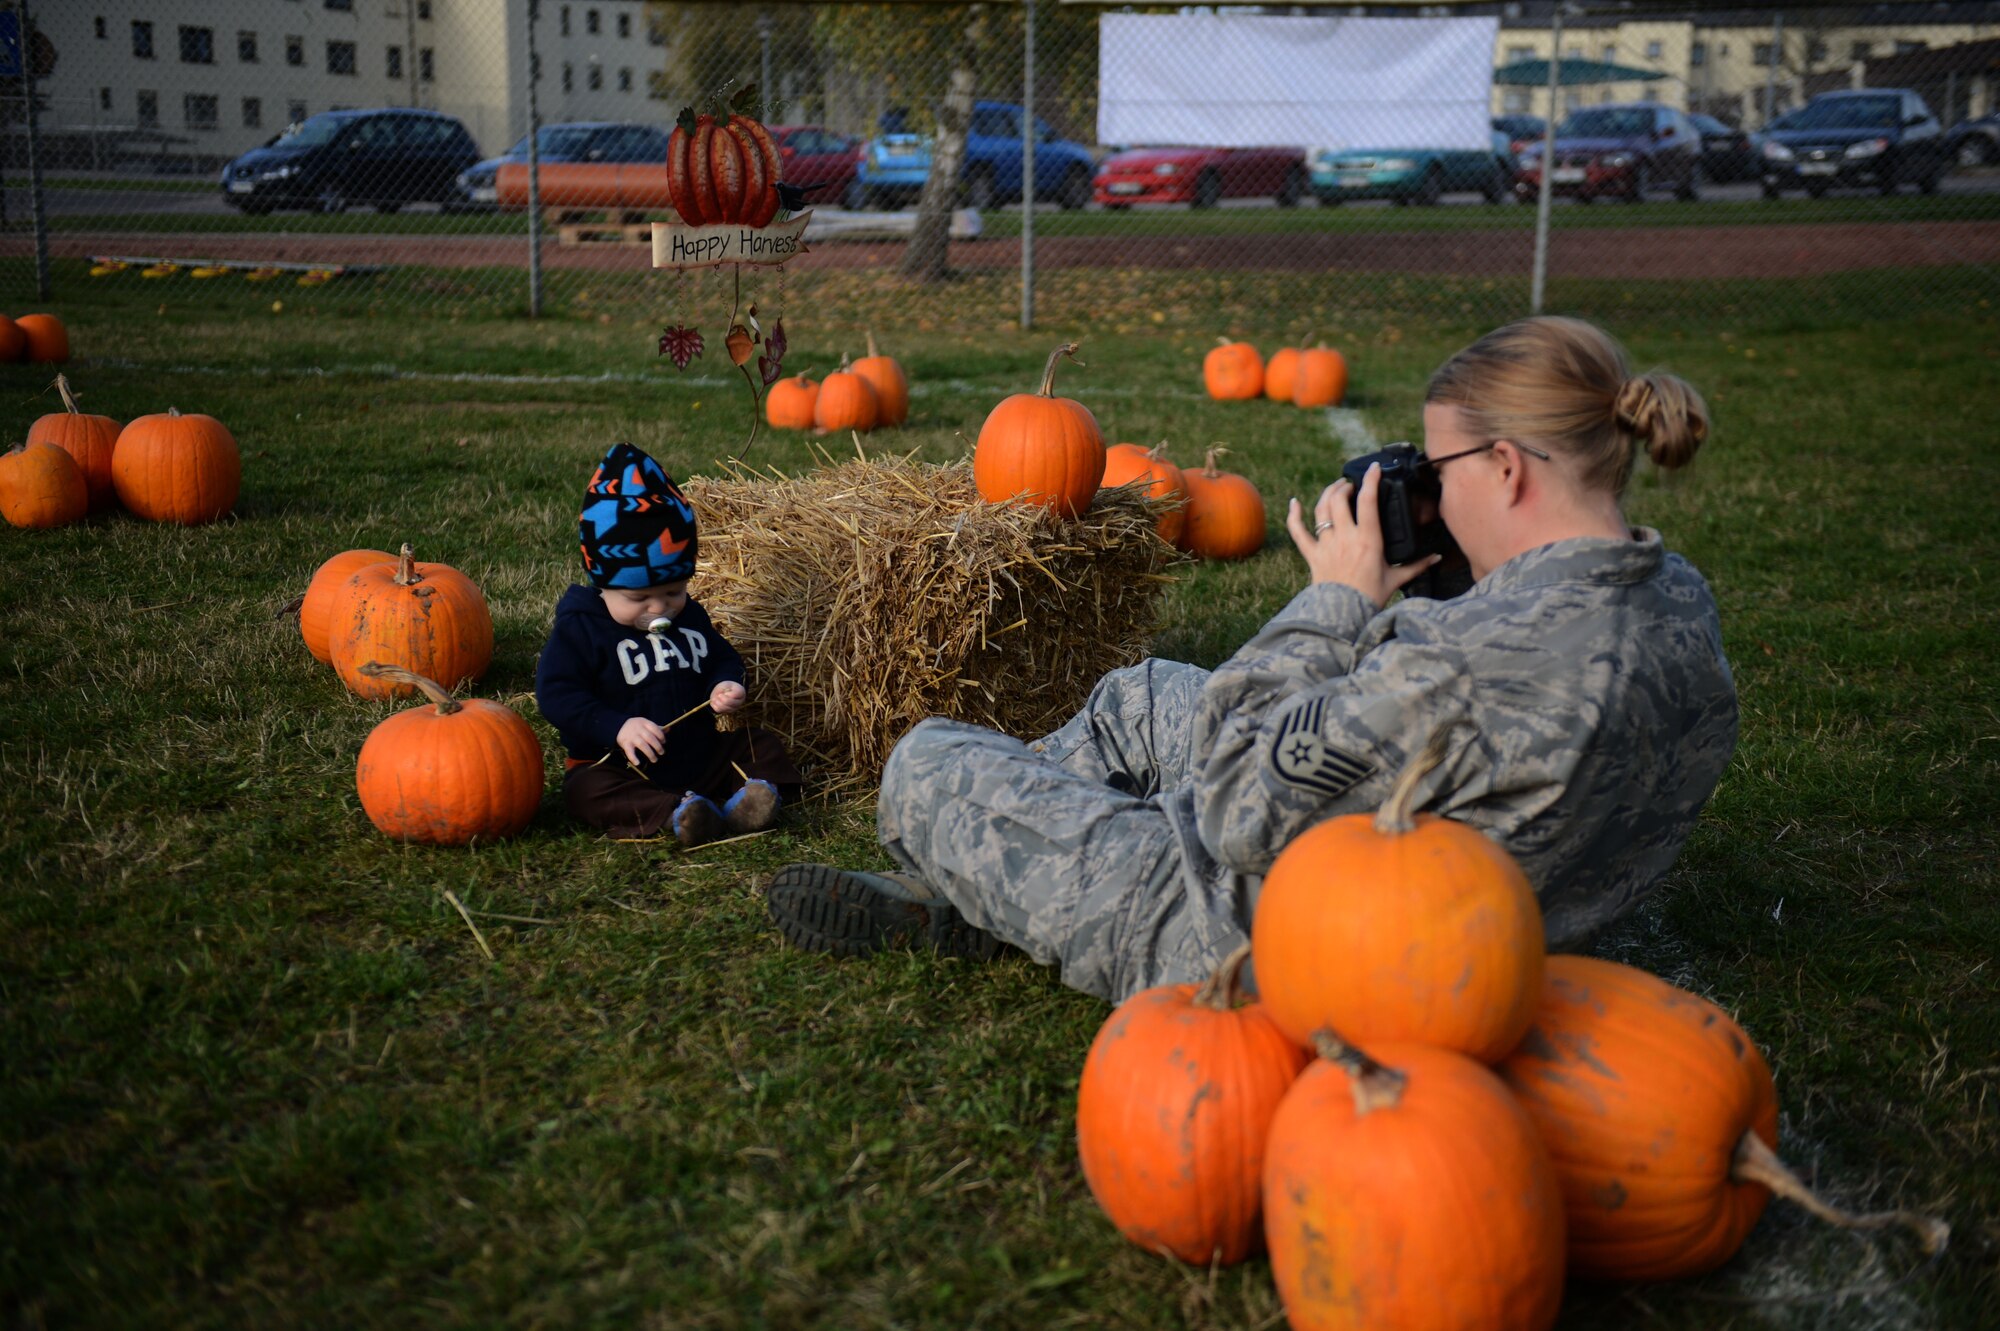 SPANGDAHLEM AIR BASE, Germany – U.S. Air Force Staff Sgt. Wendy Dupre, 52nd Communications Squadron client systems evaluator from Douglas, Ga., takes a photo of her son Maddox in a soccer field near the child development center during a pumpkin patch event Oct. 25, 2012.  The event encouraged a learning experience for the children through active parent involvement while incorporating the Halloween spirit. (U.S. Air Force photo by Airman 1st Class Gustavo Castillo/Released)